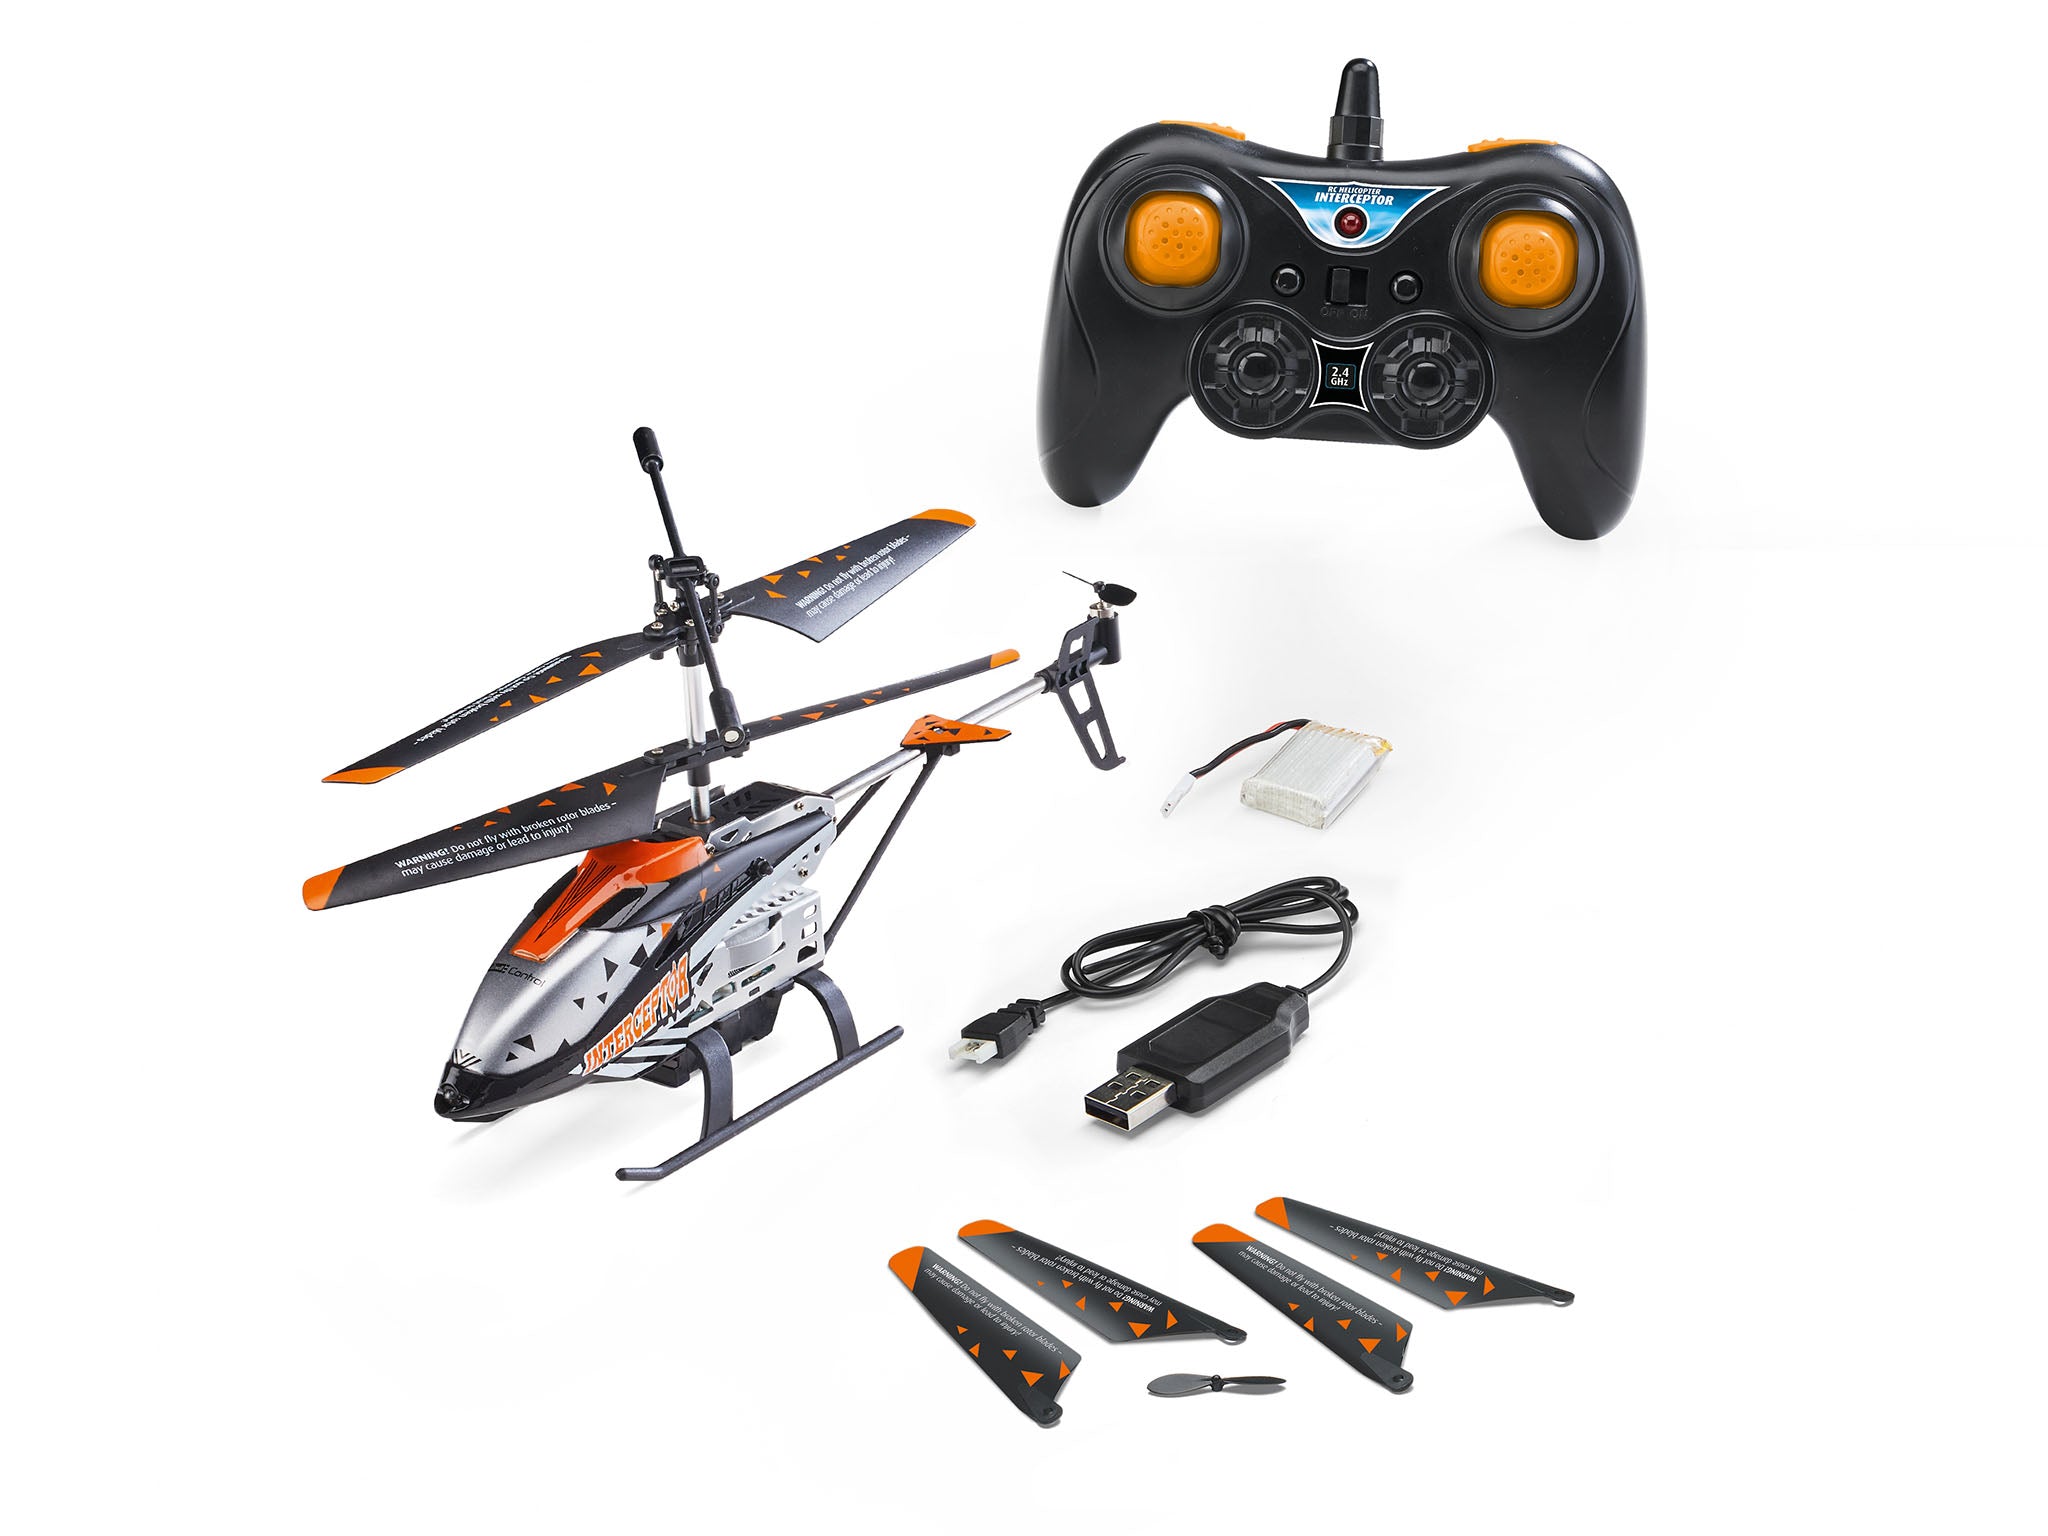 Radio Control Helicopter Revell RC Helicopter Interceptor Anti Collision